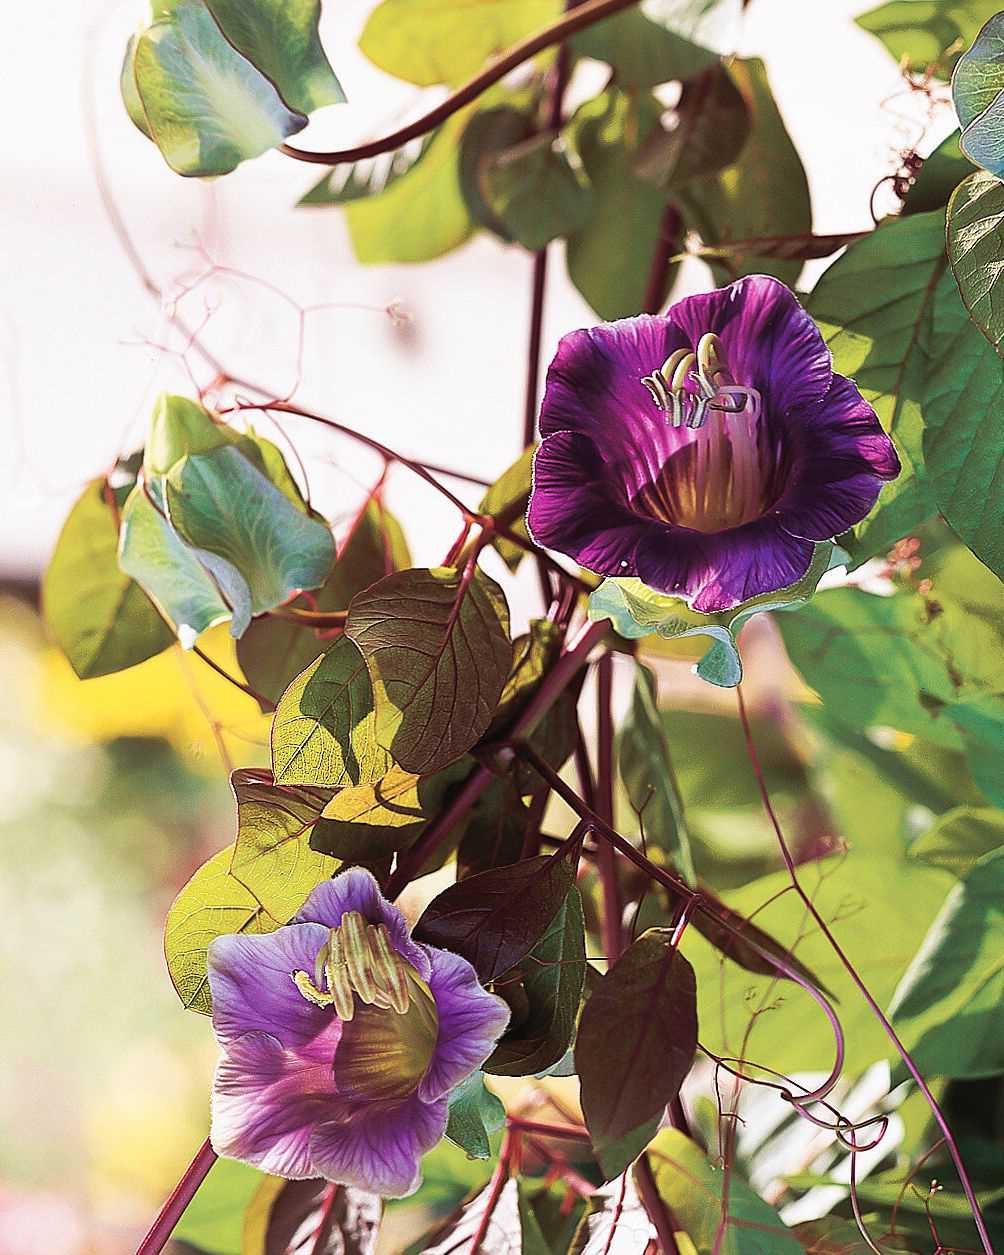 Caring for a Vine with Purple Flowers